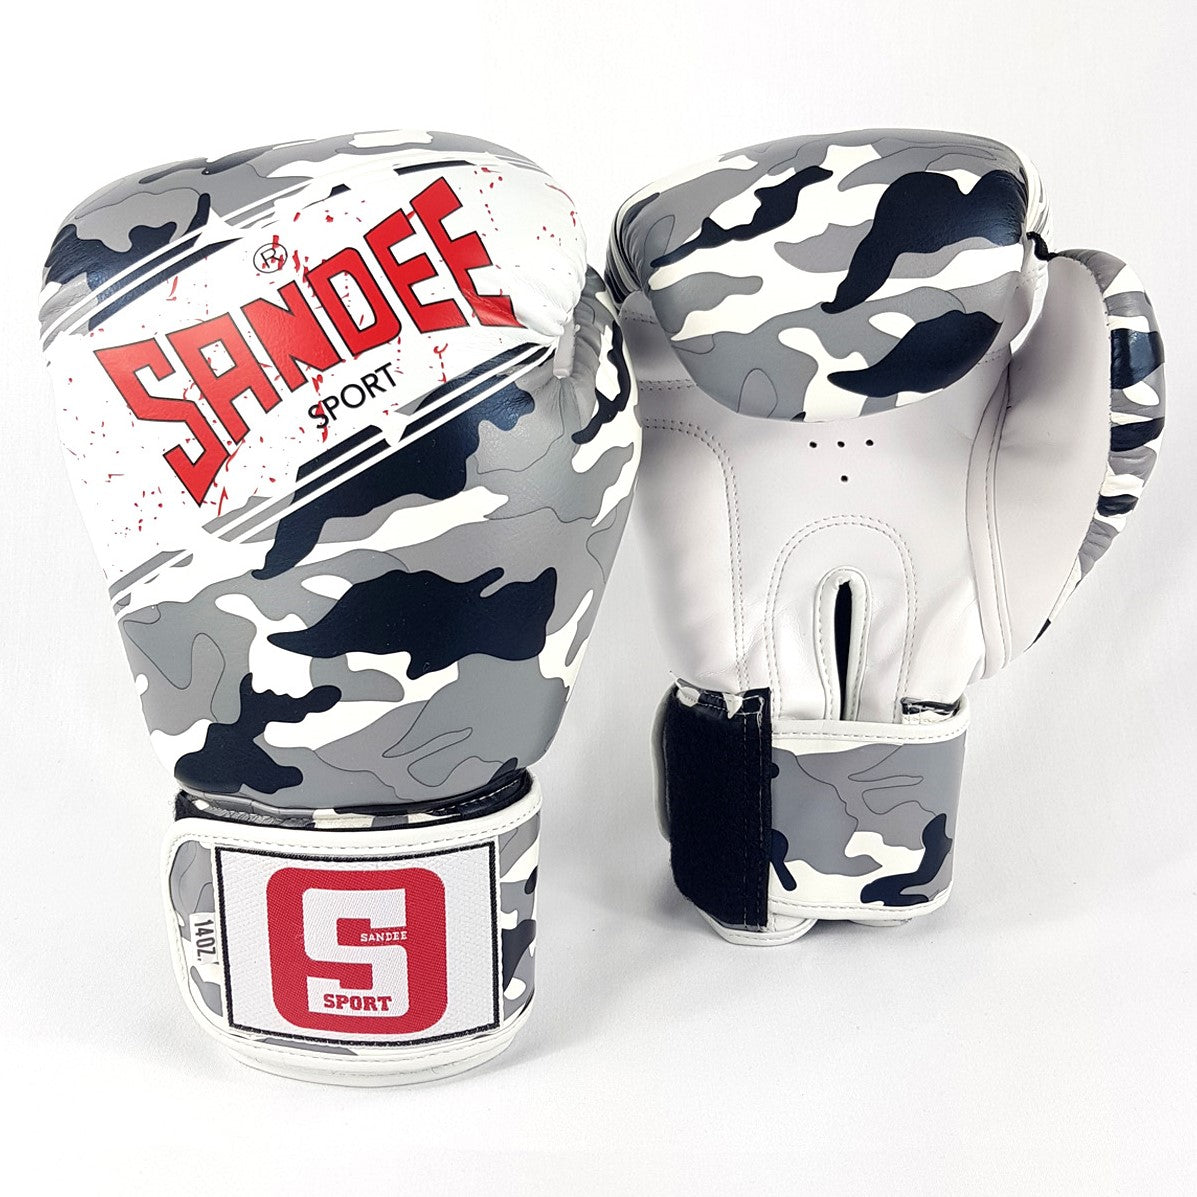 Sandee Sport Velcro Camo Grey/Black/White Synthetic Leather Boxing Glove